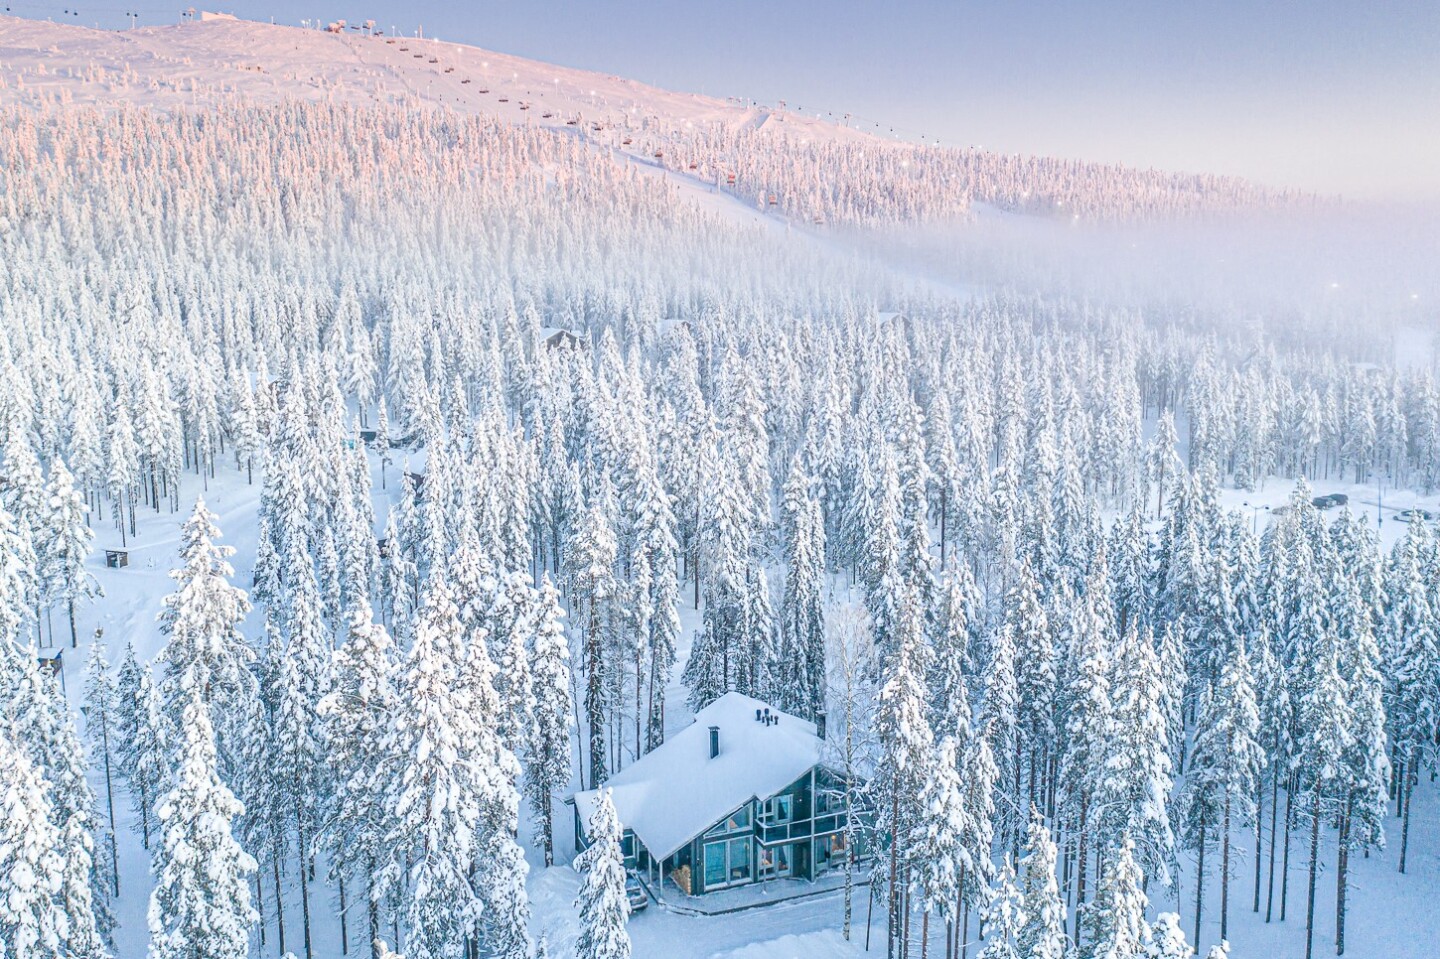 Aerial view of a chalet surrounded by snow-covered evergreen trees, with a ski slope in the distance and a pinkish glow over the mountain